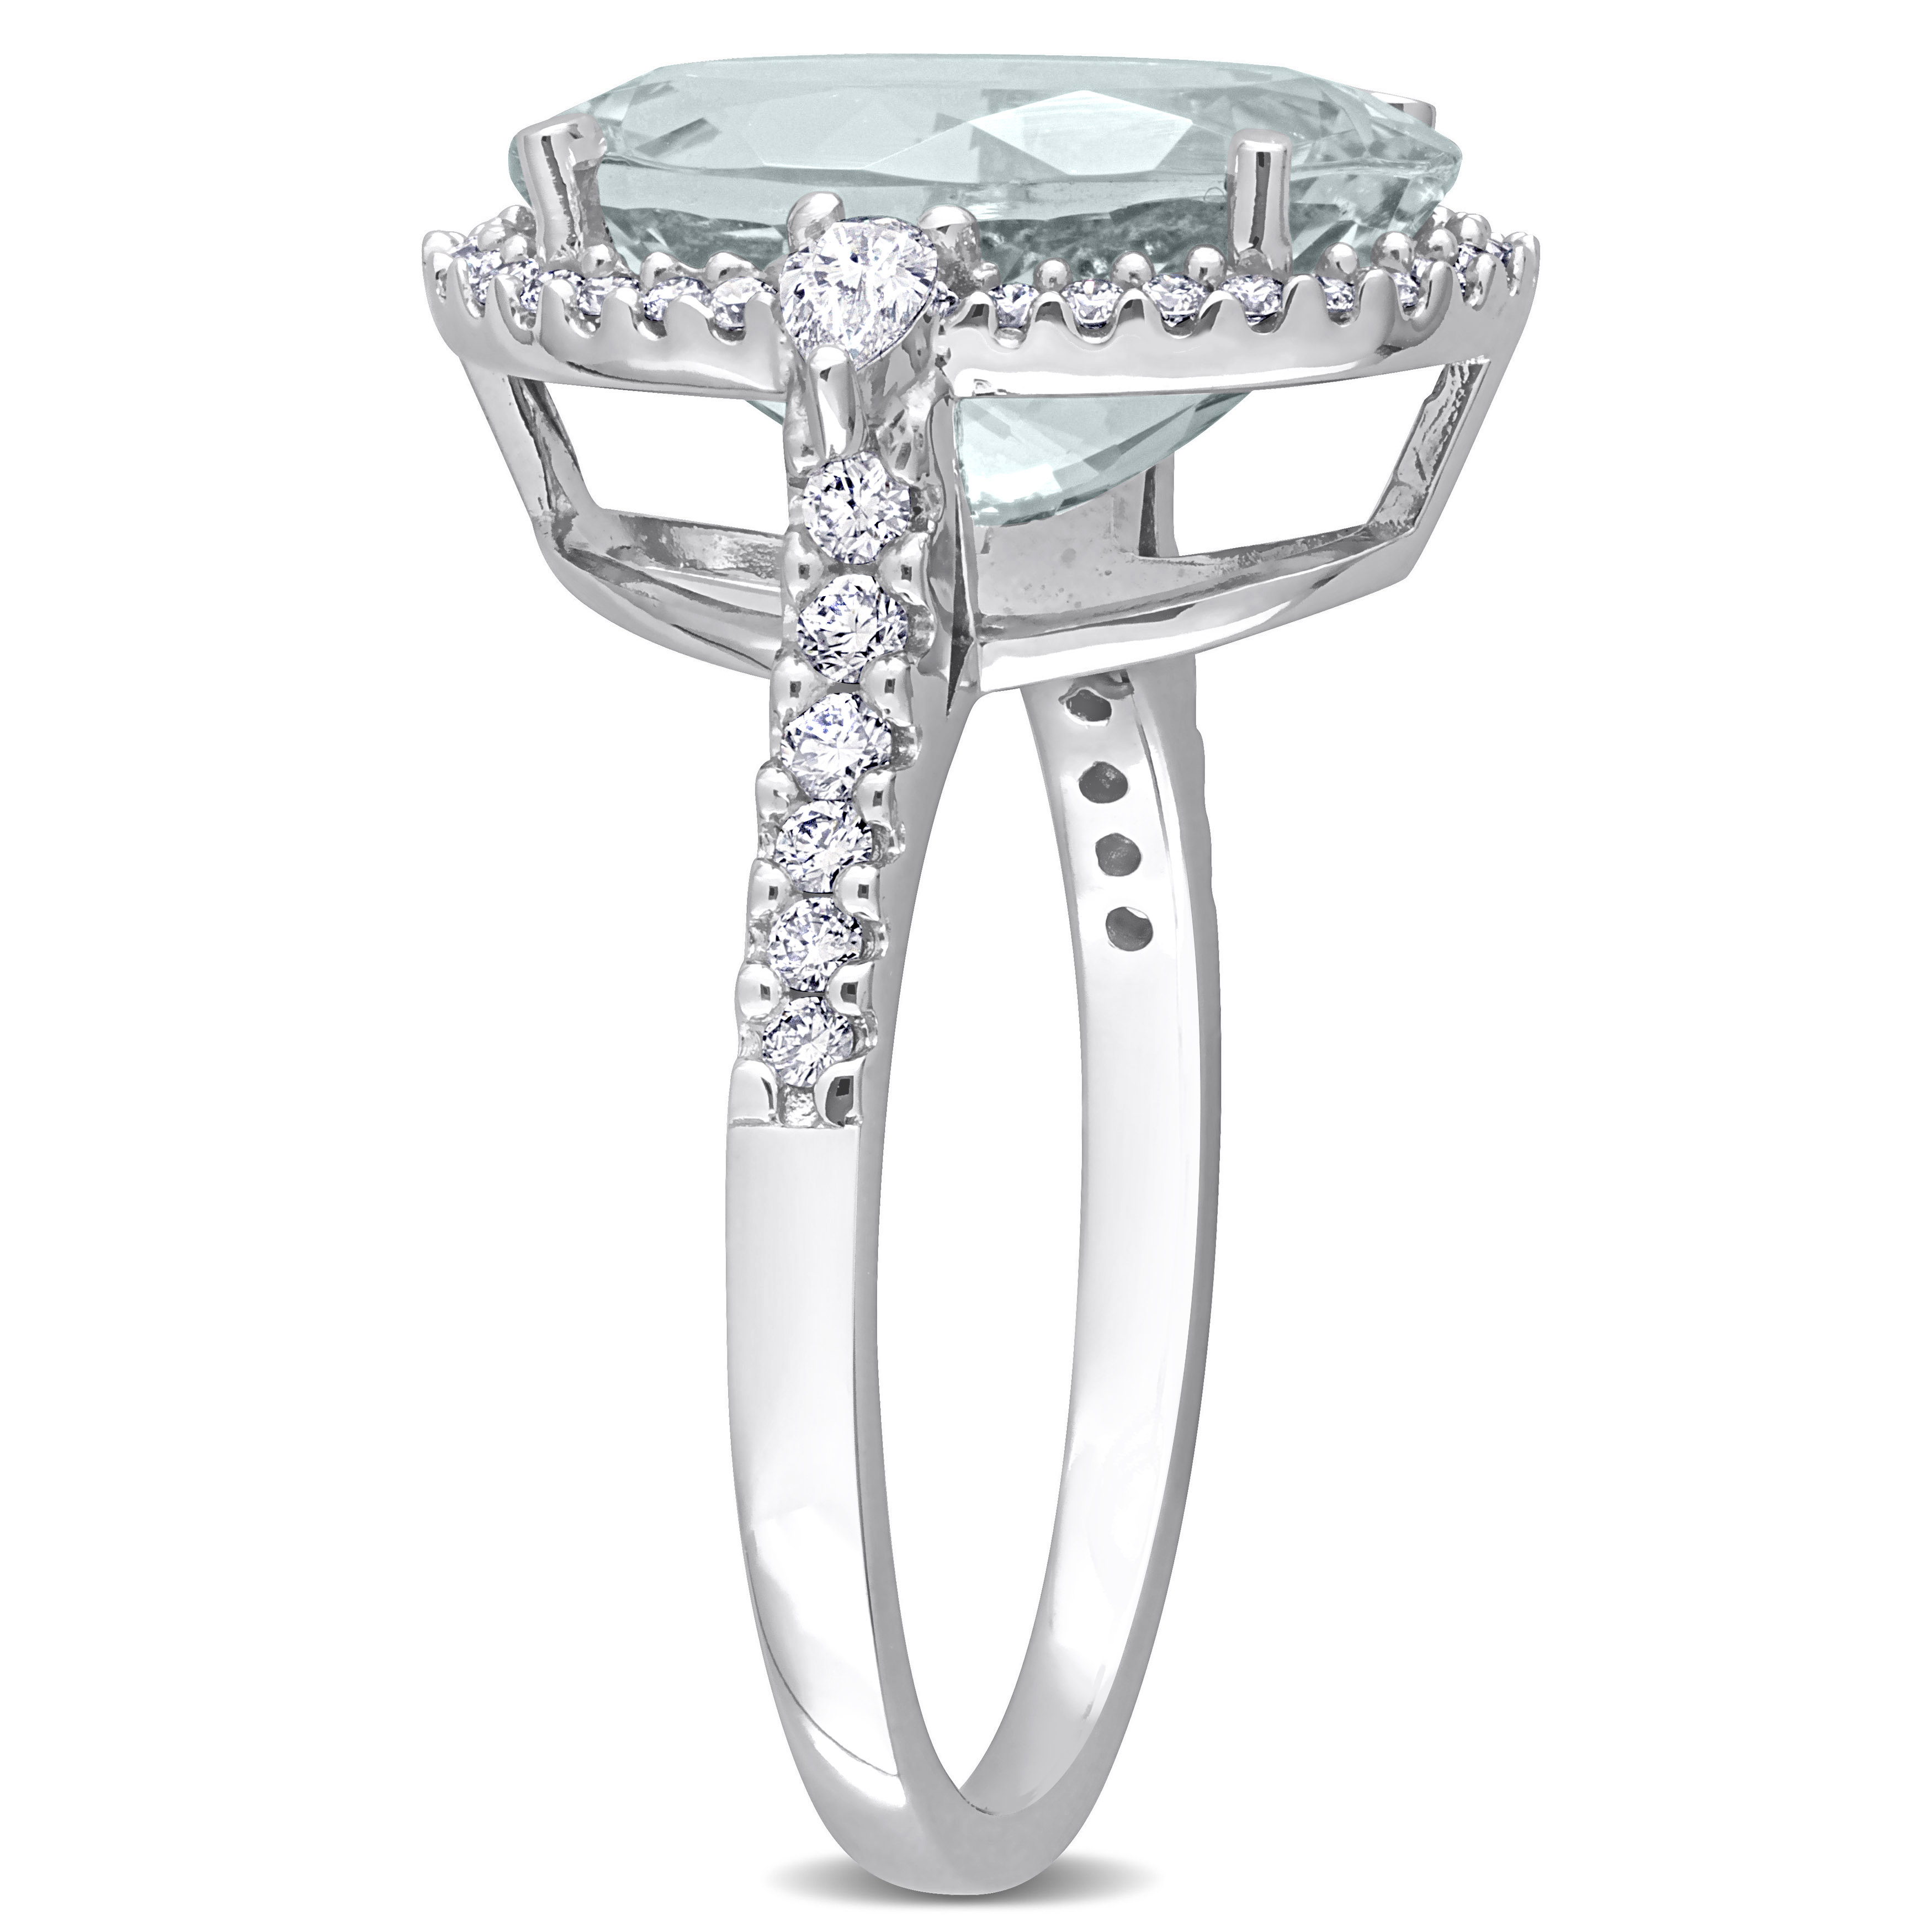 5 5/8 CT TGW Oval Aquamarine and 1/2 CT TW Pear and Round Diamond Halo Cocktail Ring in 14k White Gold